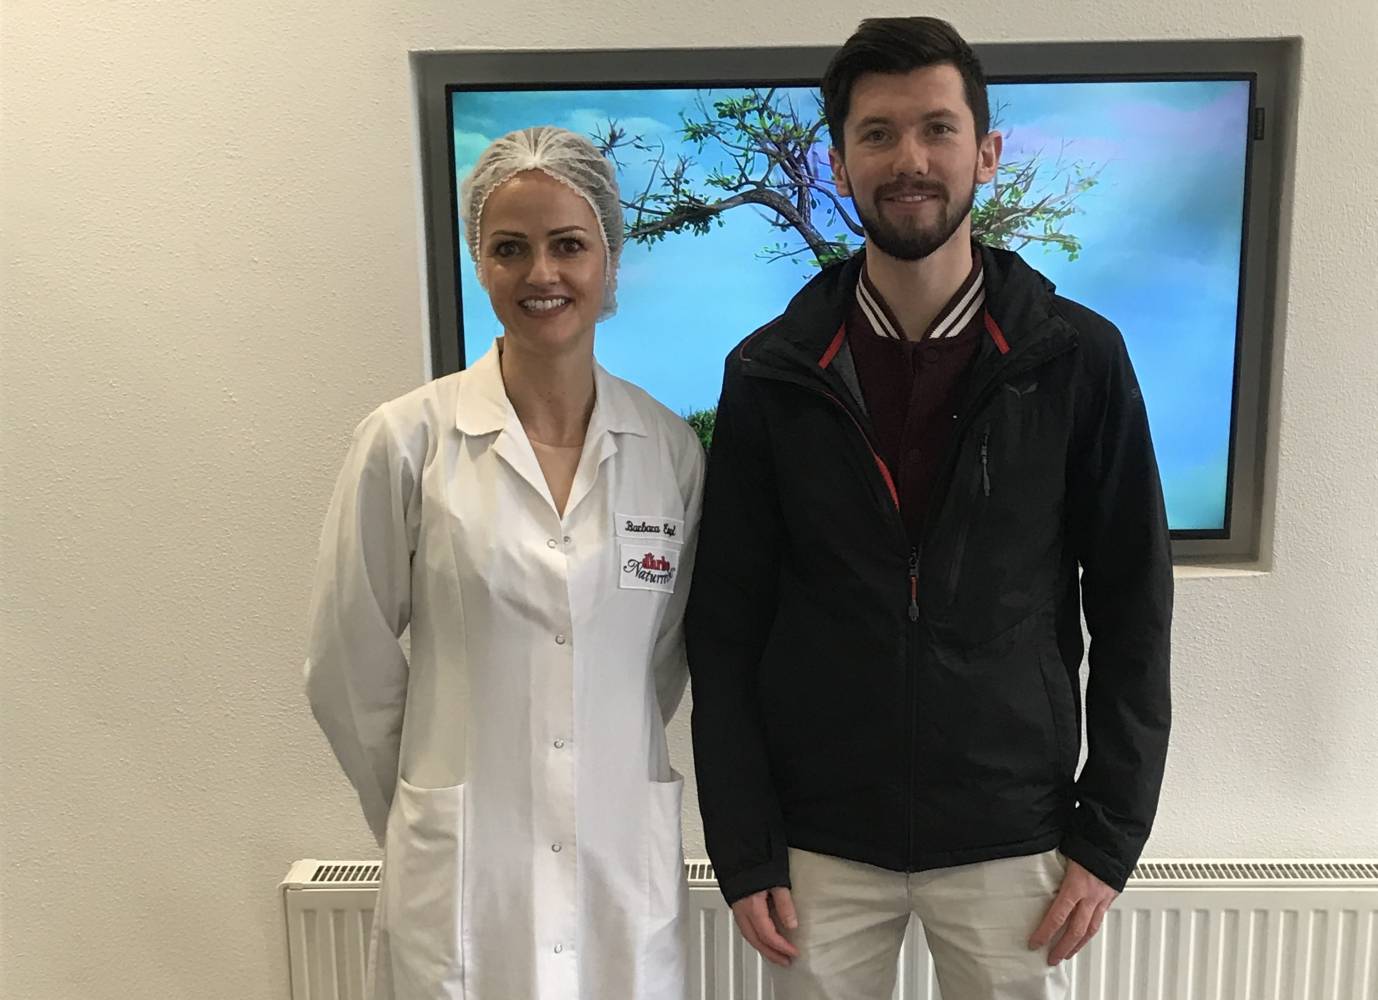 MCI student Dominik Huber with Dr. Barbara Empl, head of Darbo quality management. Foto: MCI/Bach